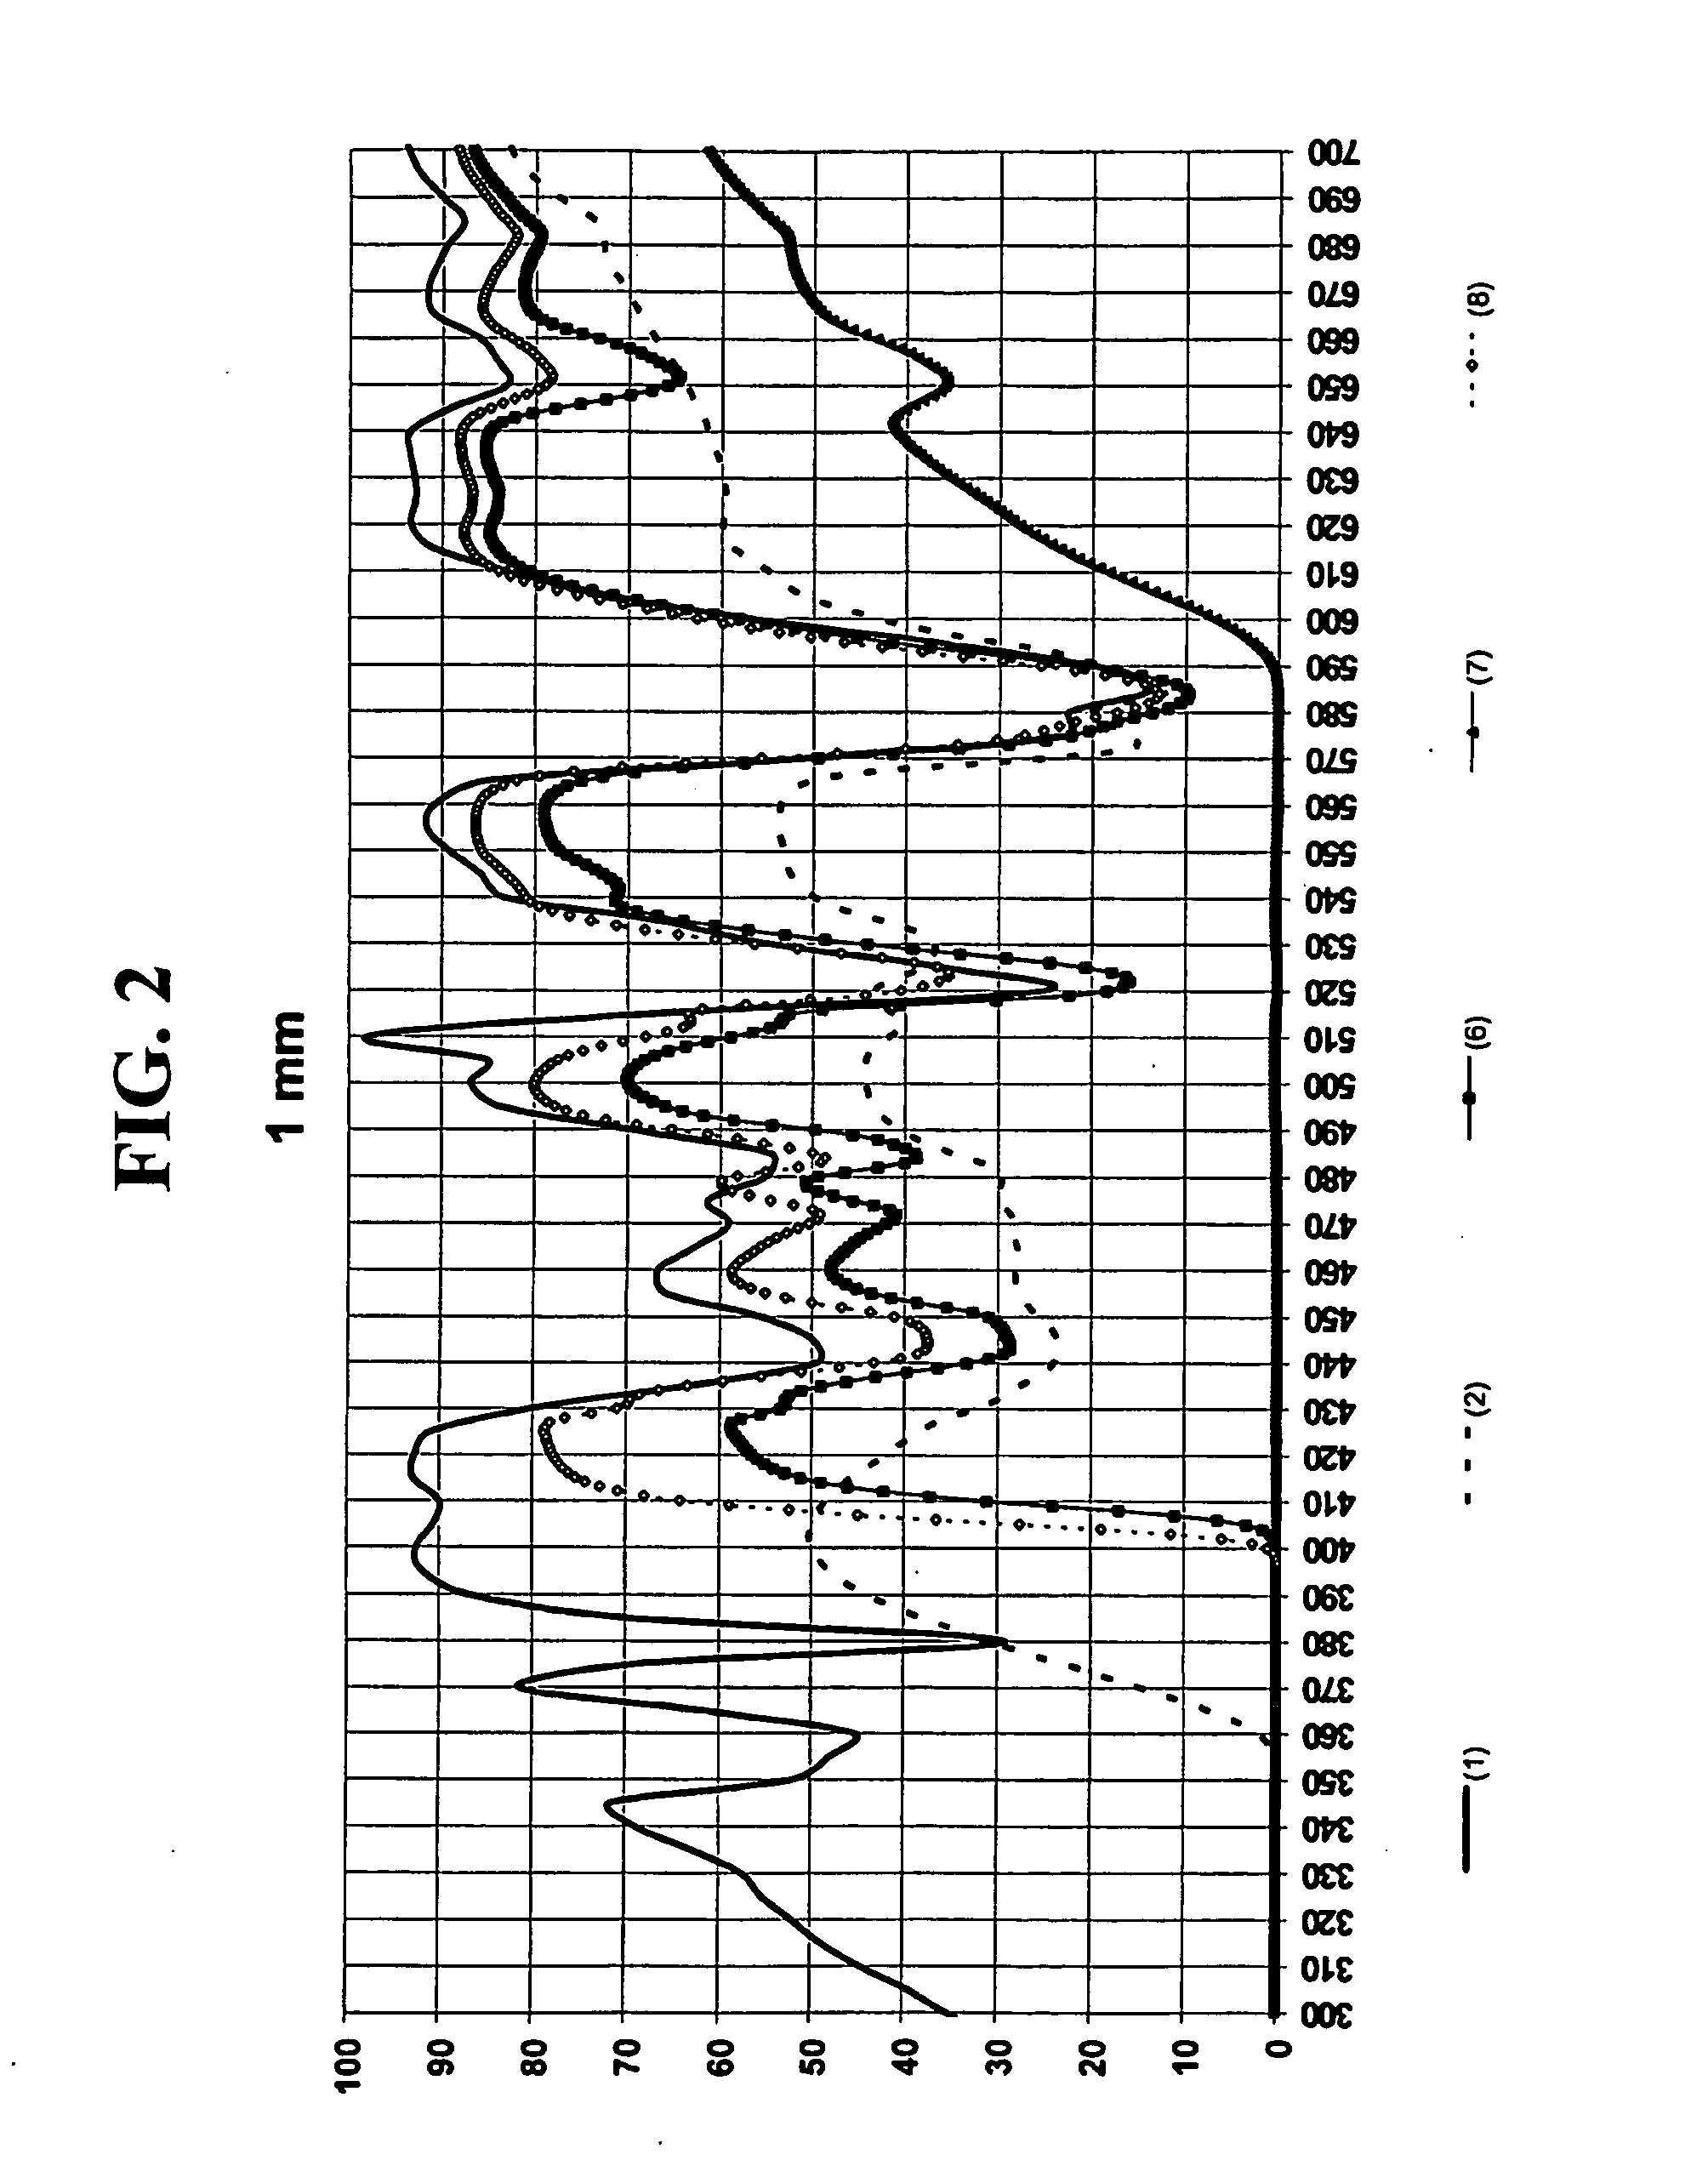 Contrast-Enhancing UV-Absorbing Glass and Articles Containing Same